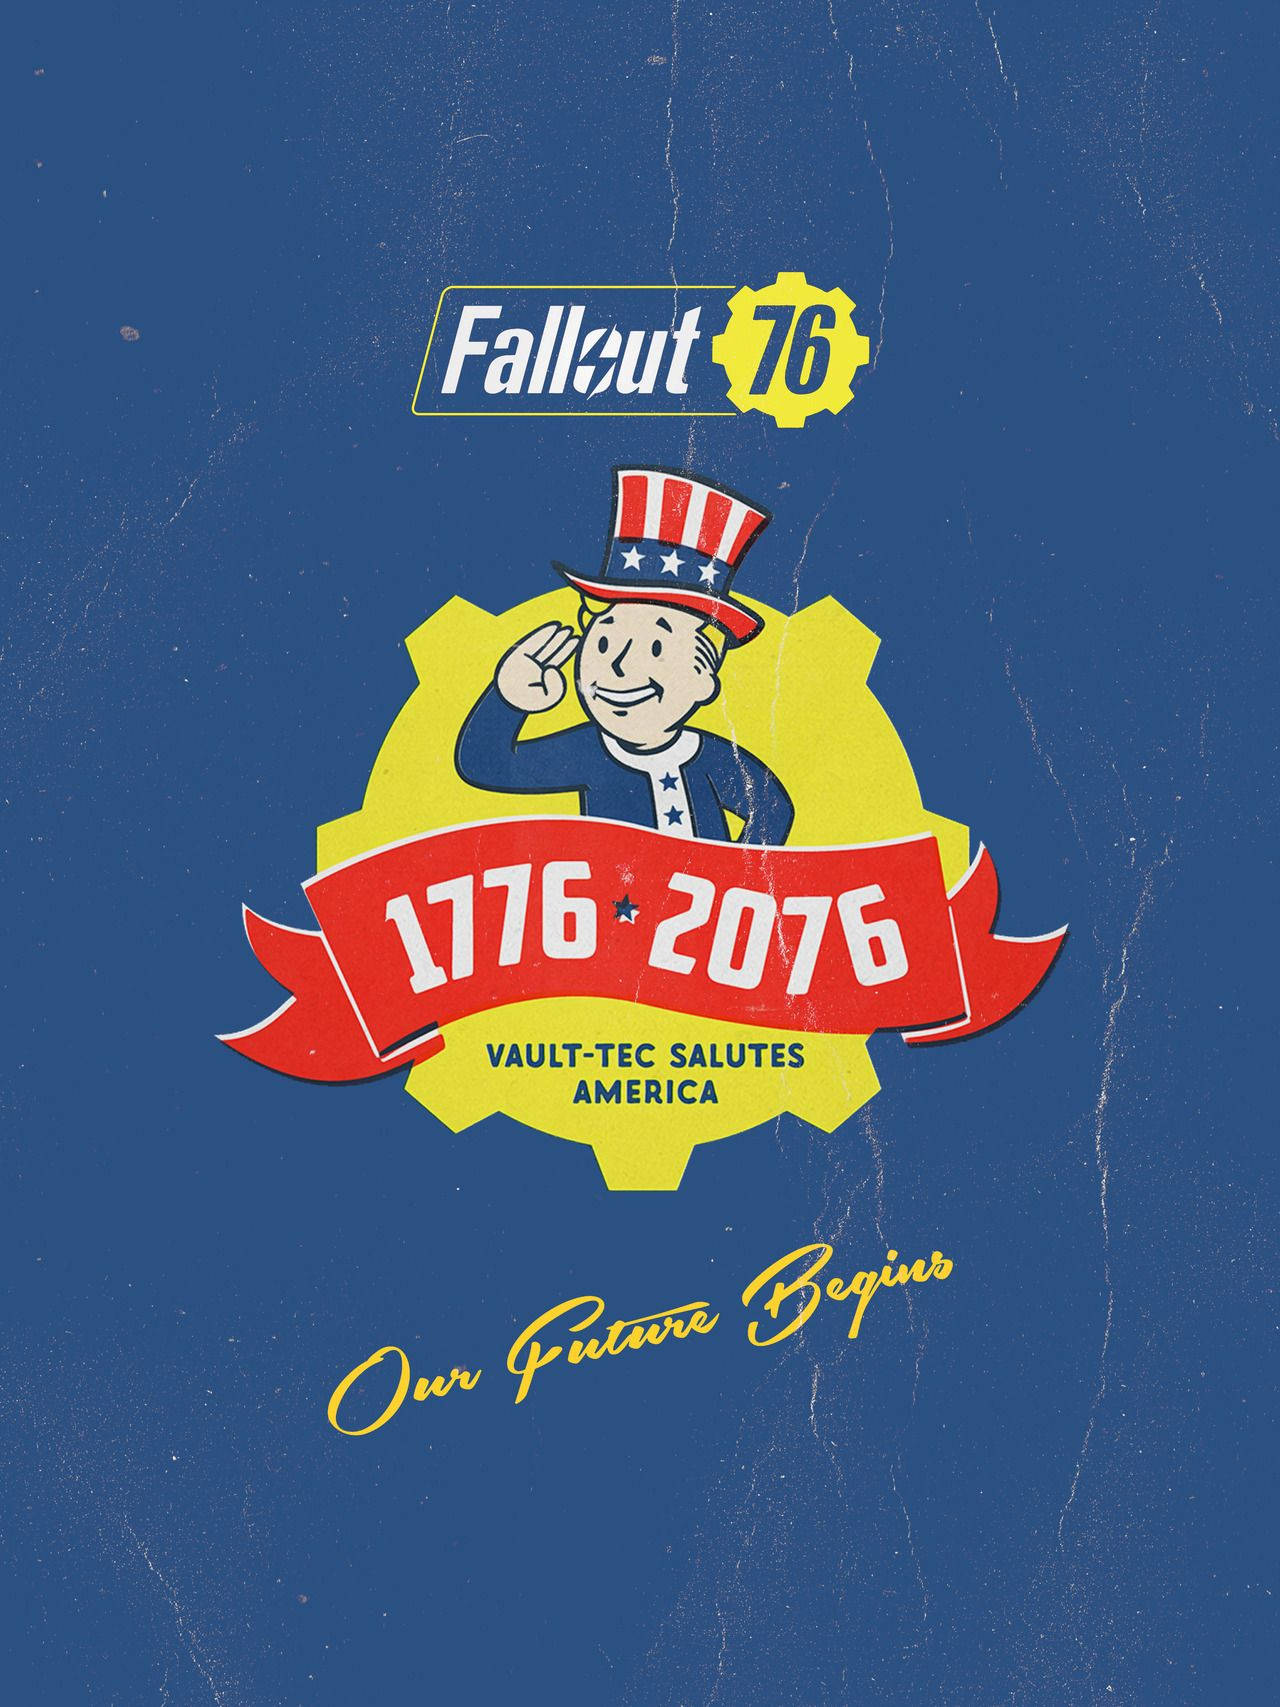 Fallout 76 Vault Boy Campaign Poster Background